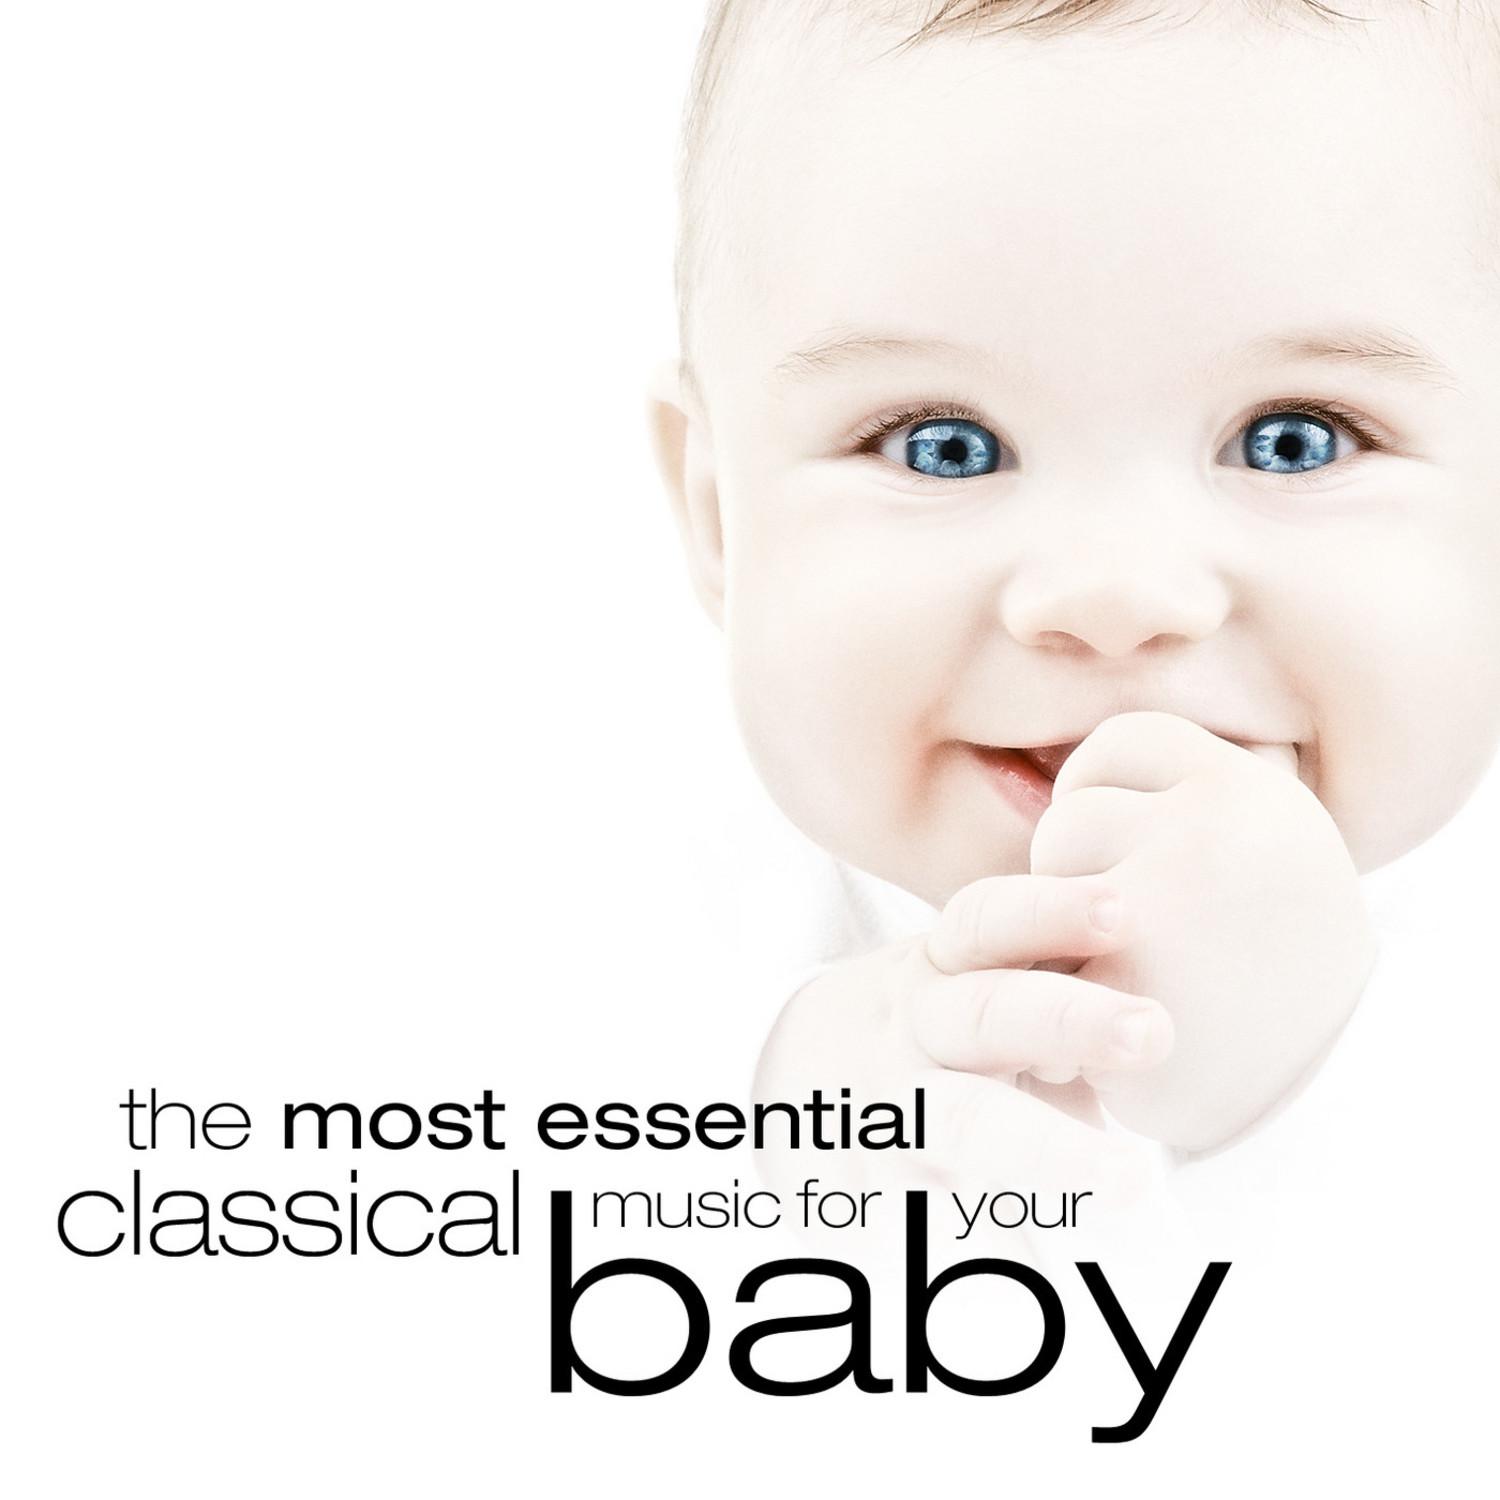 The Most Essential Classical Music for Your Baby